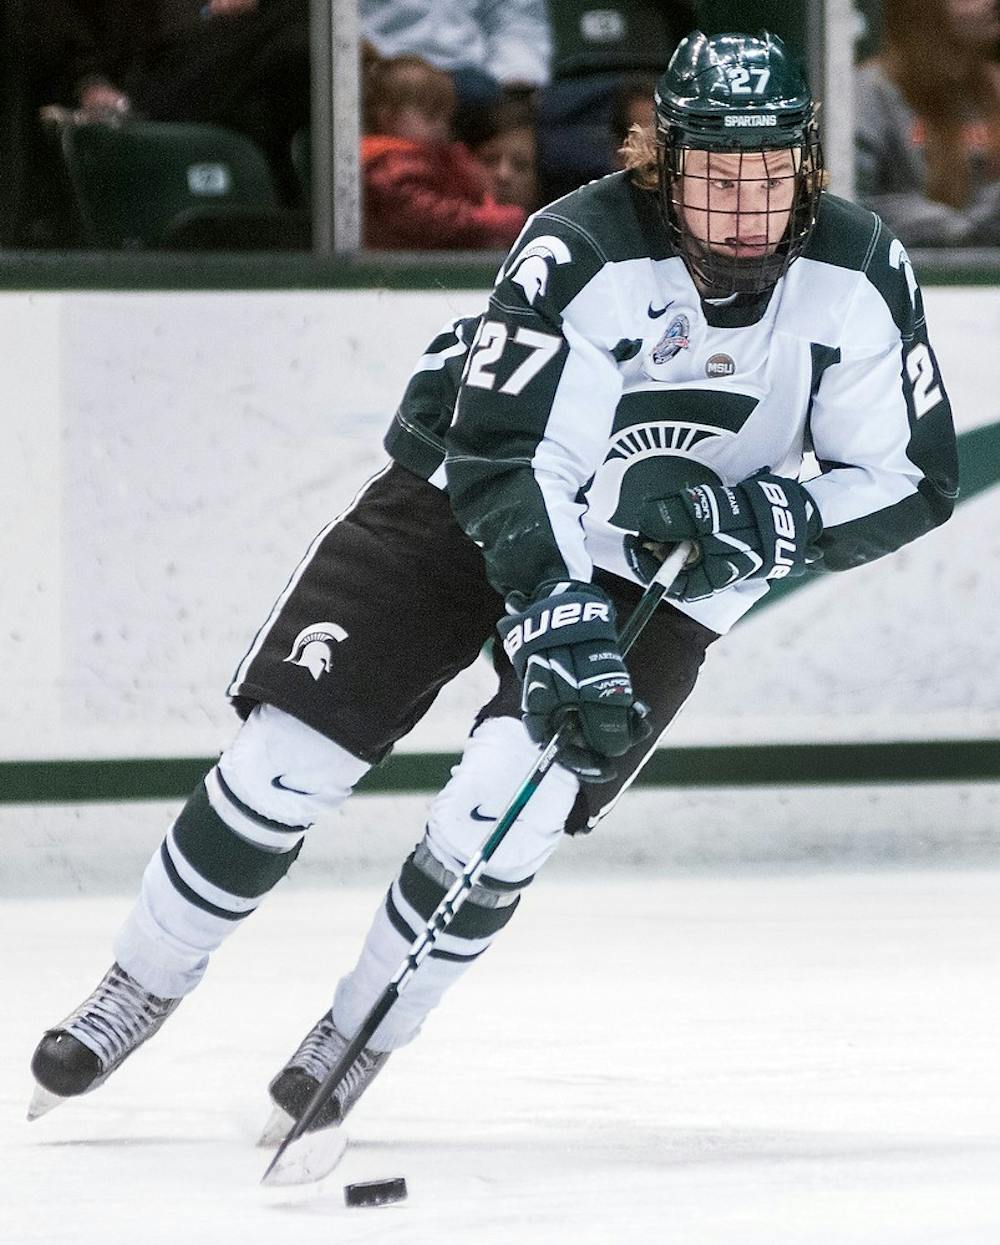 	<p>Sophomore left wing Matt Berry collects a pass Friday, Feb. 15, 2013, at Munn Ice Arena. The Wildcats defeated the Spartans, 5-3, during the first game of the weekend series. Adam Toolin/The State News</p>